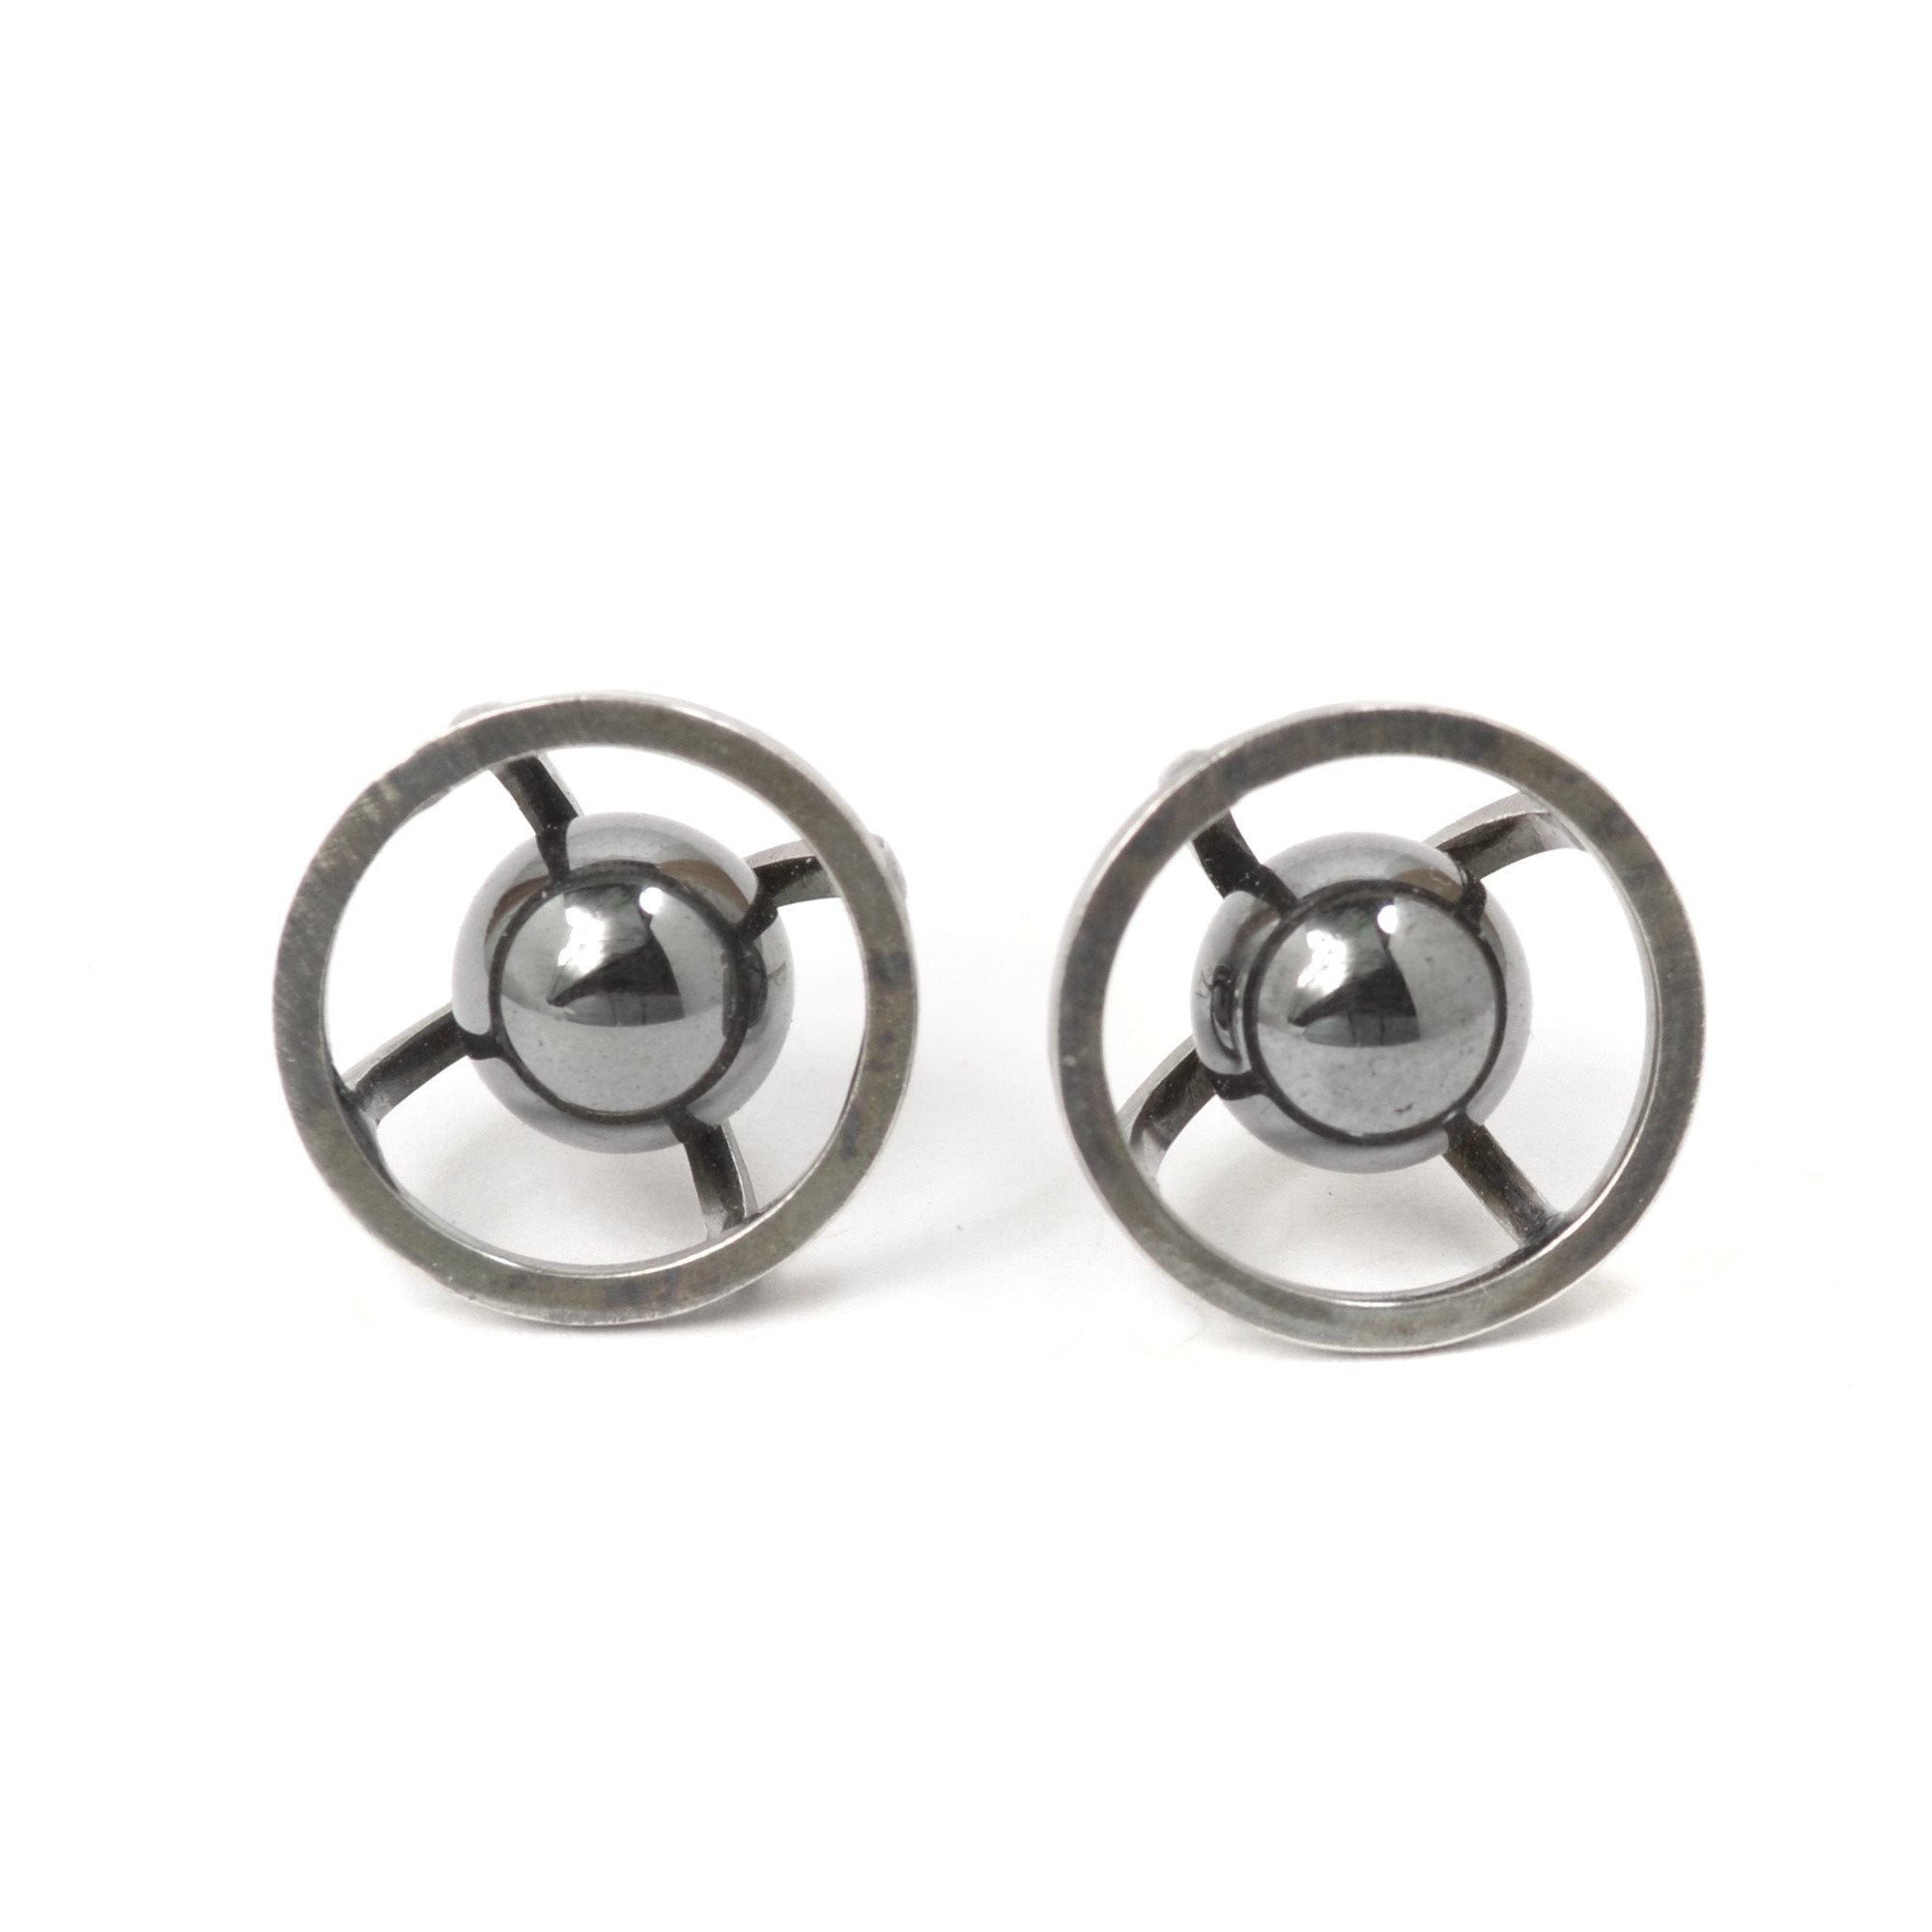 Sphere of Reflection Stud Earrings in Sterling Silver, Dark Patina Finish, and Hematite